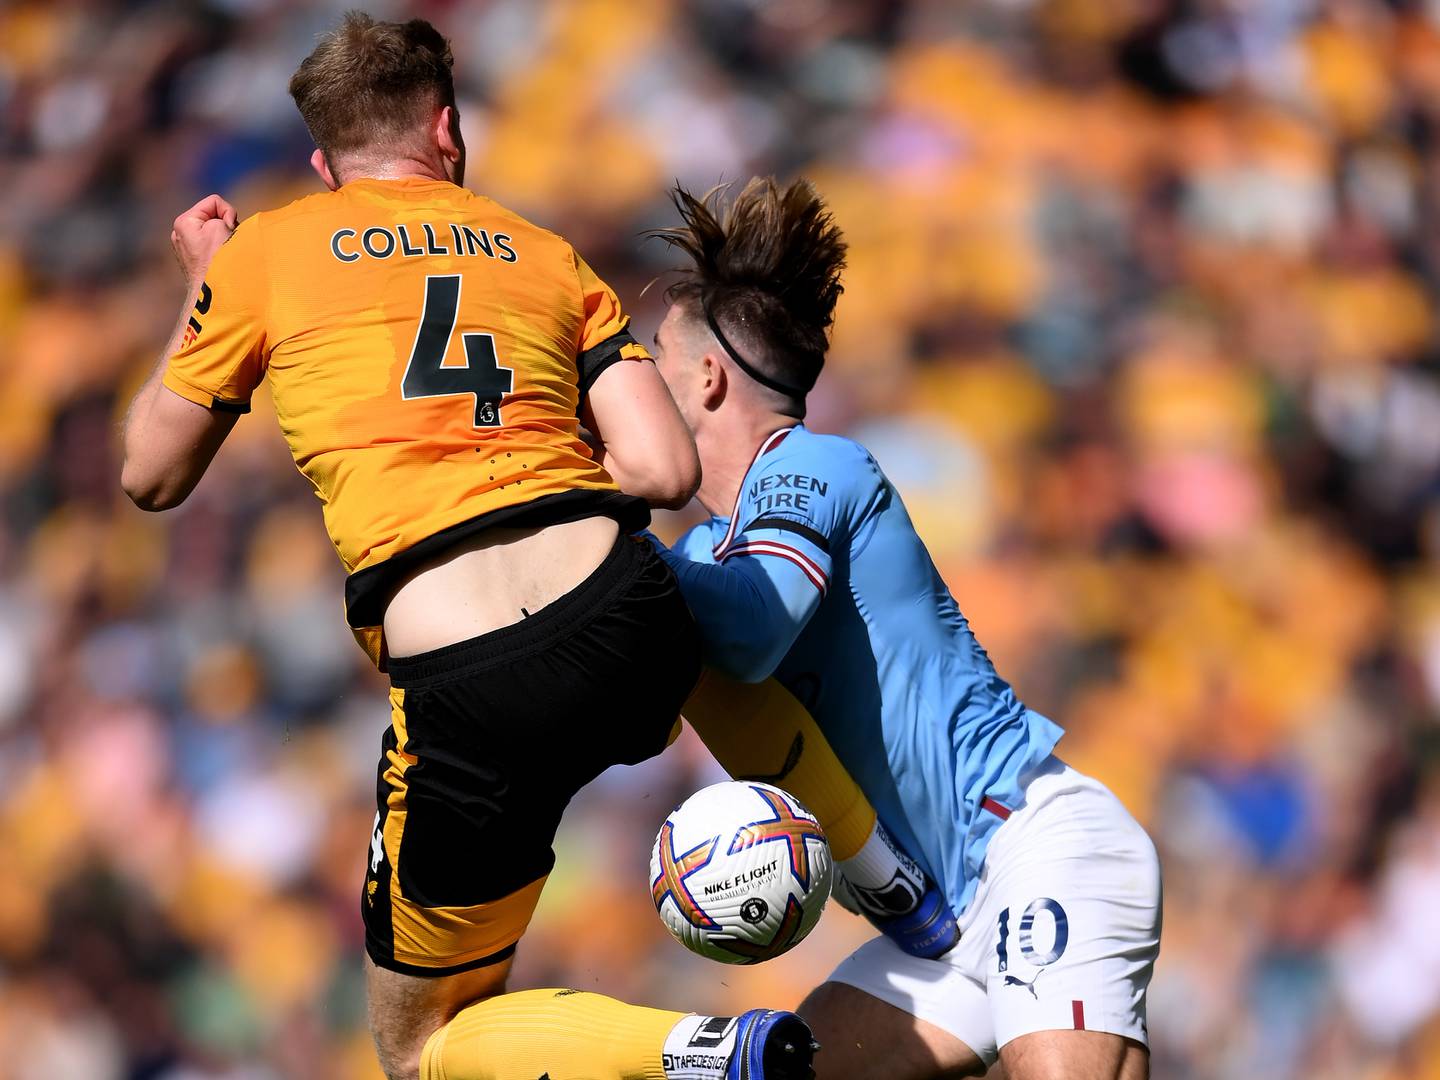 Wolves' Nathan Collins was shown a red card for this challenge on Jack Grealish of Manchester City. Getty